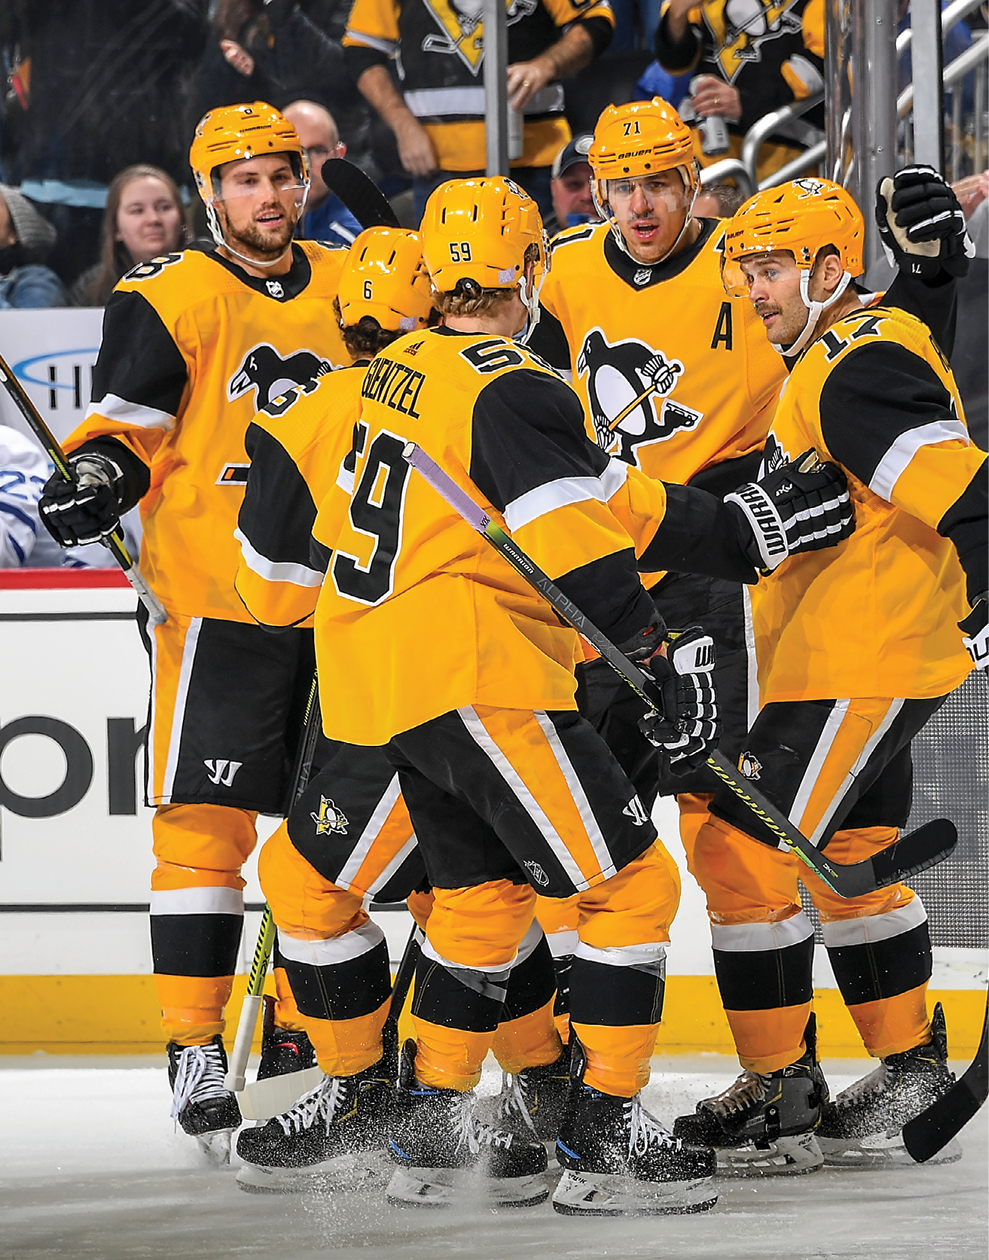 PITTSBURGH, PA - NOVEMBER 16:  Evgeni Malkin #71 of the Pittsburgh Penguins celebrates his goal with teammates during the first period against the Toronto Maple Leafs at PPG PAINTS Arena on November 16, 2019 in Pittsburgh, Pennsylvania  (Photo by Joe Sargent NHLI via Getty Images)